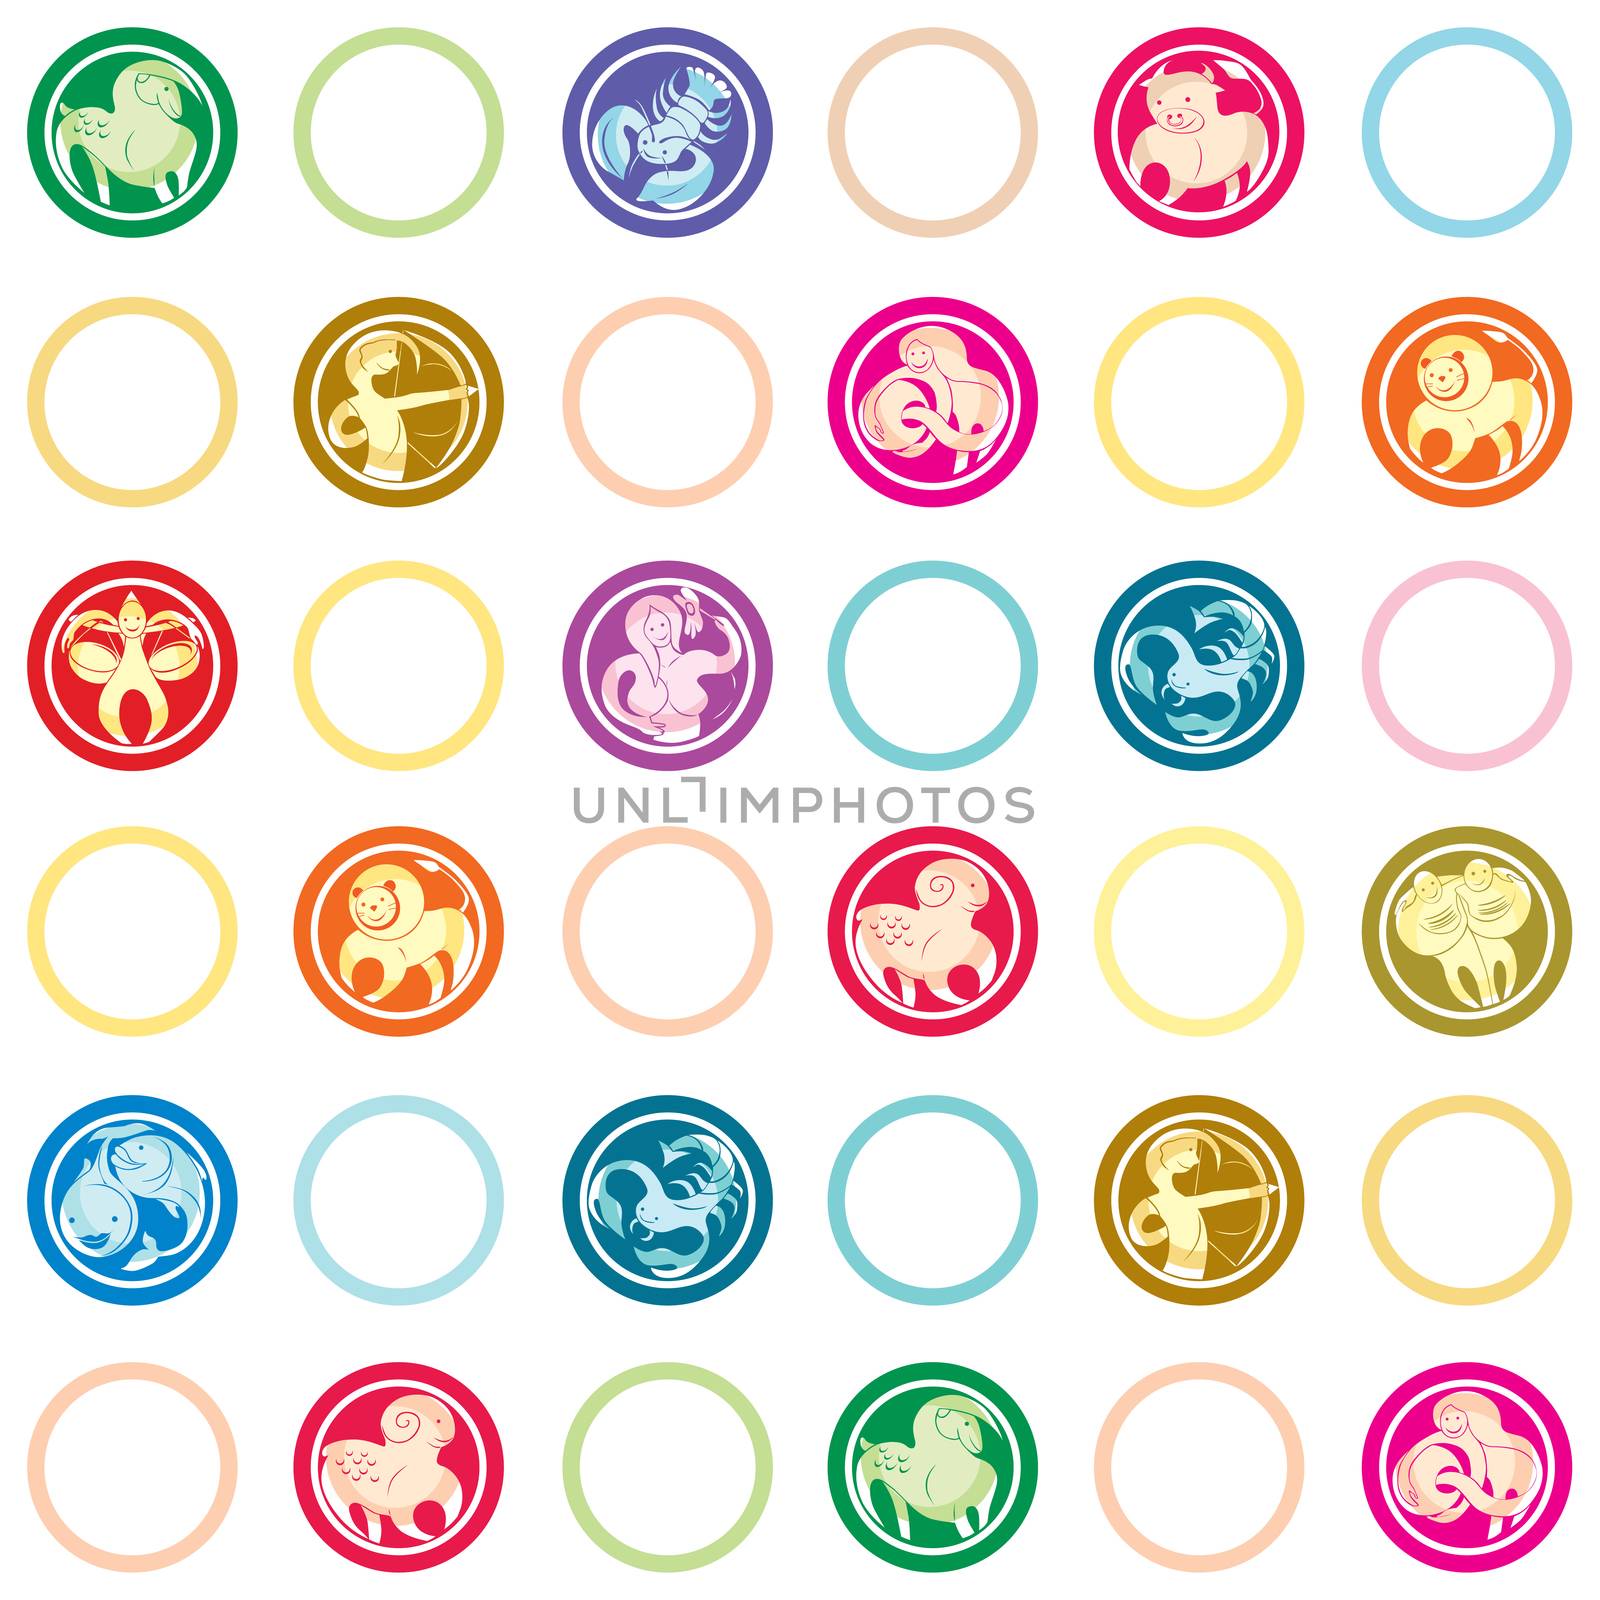 Retro pattern with all zodiac signs and circular shapes, funny cartoon illustrations over white background